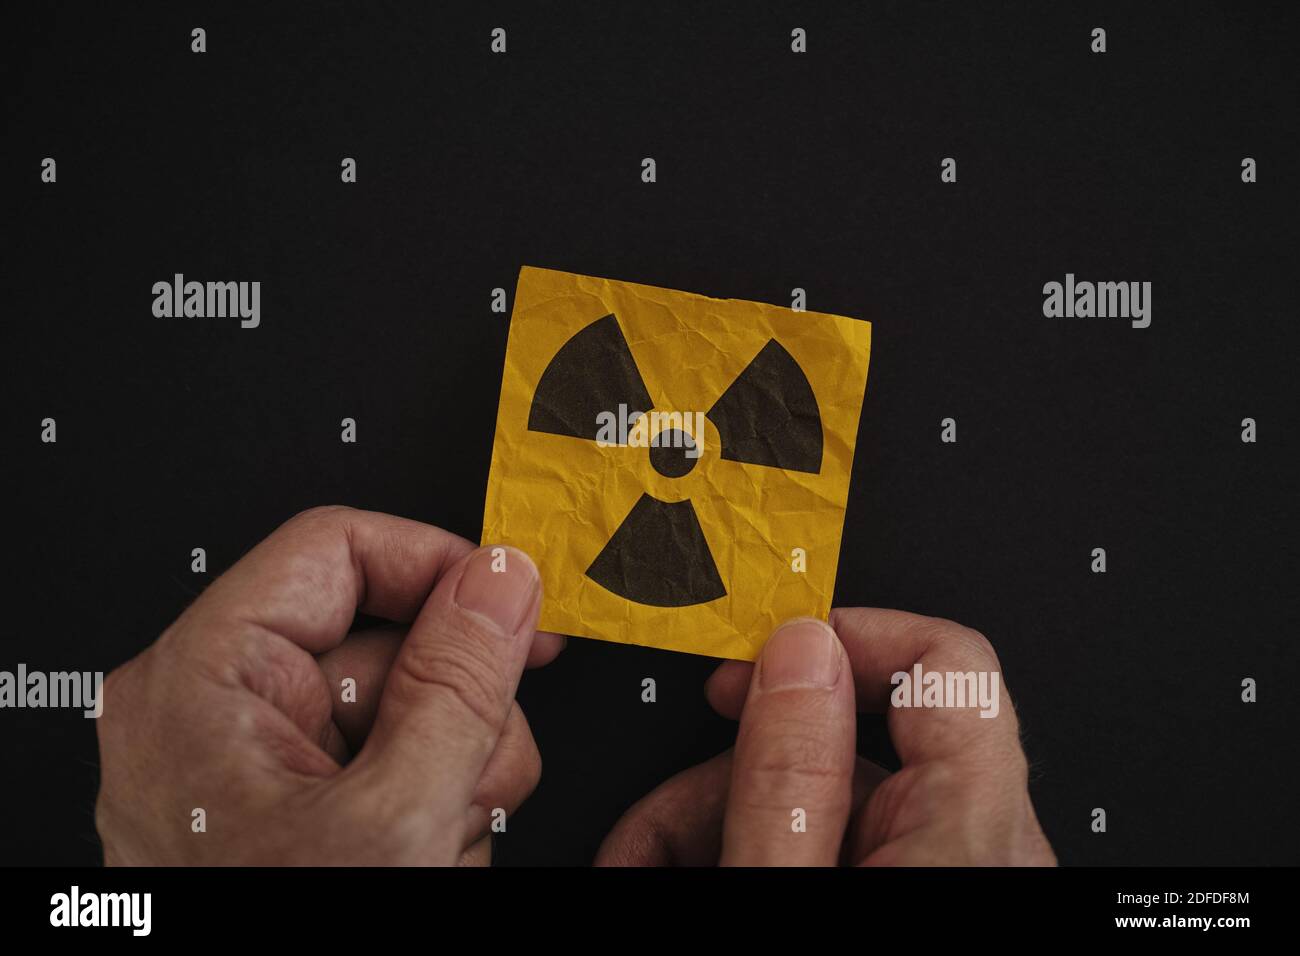 Man holding a radiation warning sign in his hands against a black background. Low key. Stock Photo